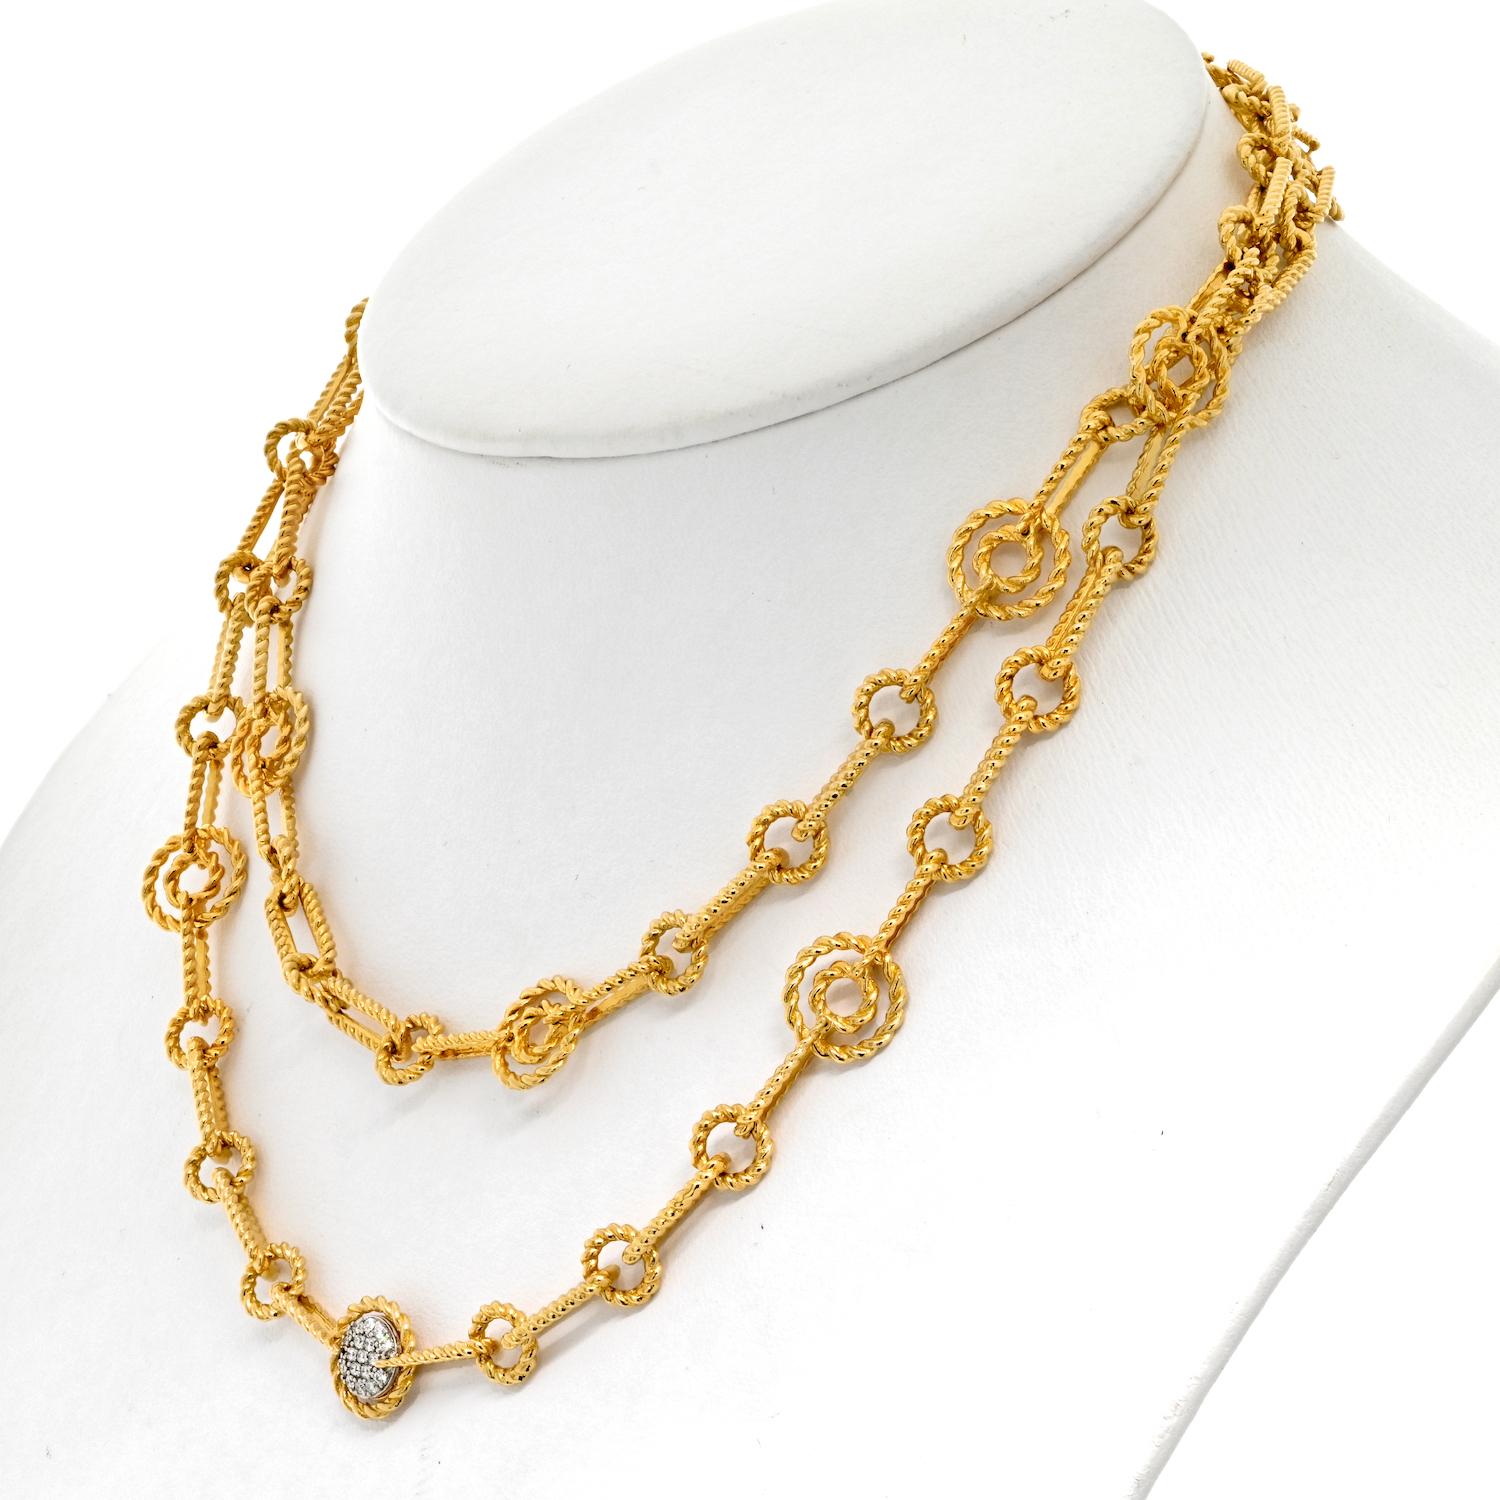 Modern Roberto Coin 18k Yellow Gold Twisted Rope Link Chain Necklace